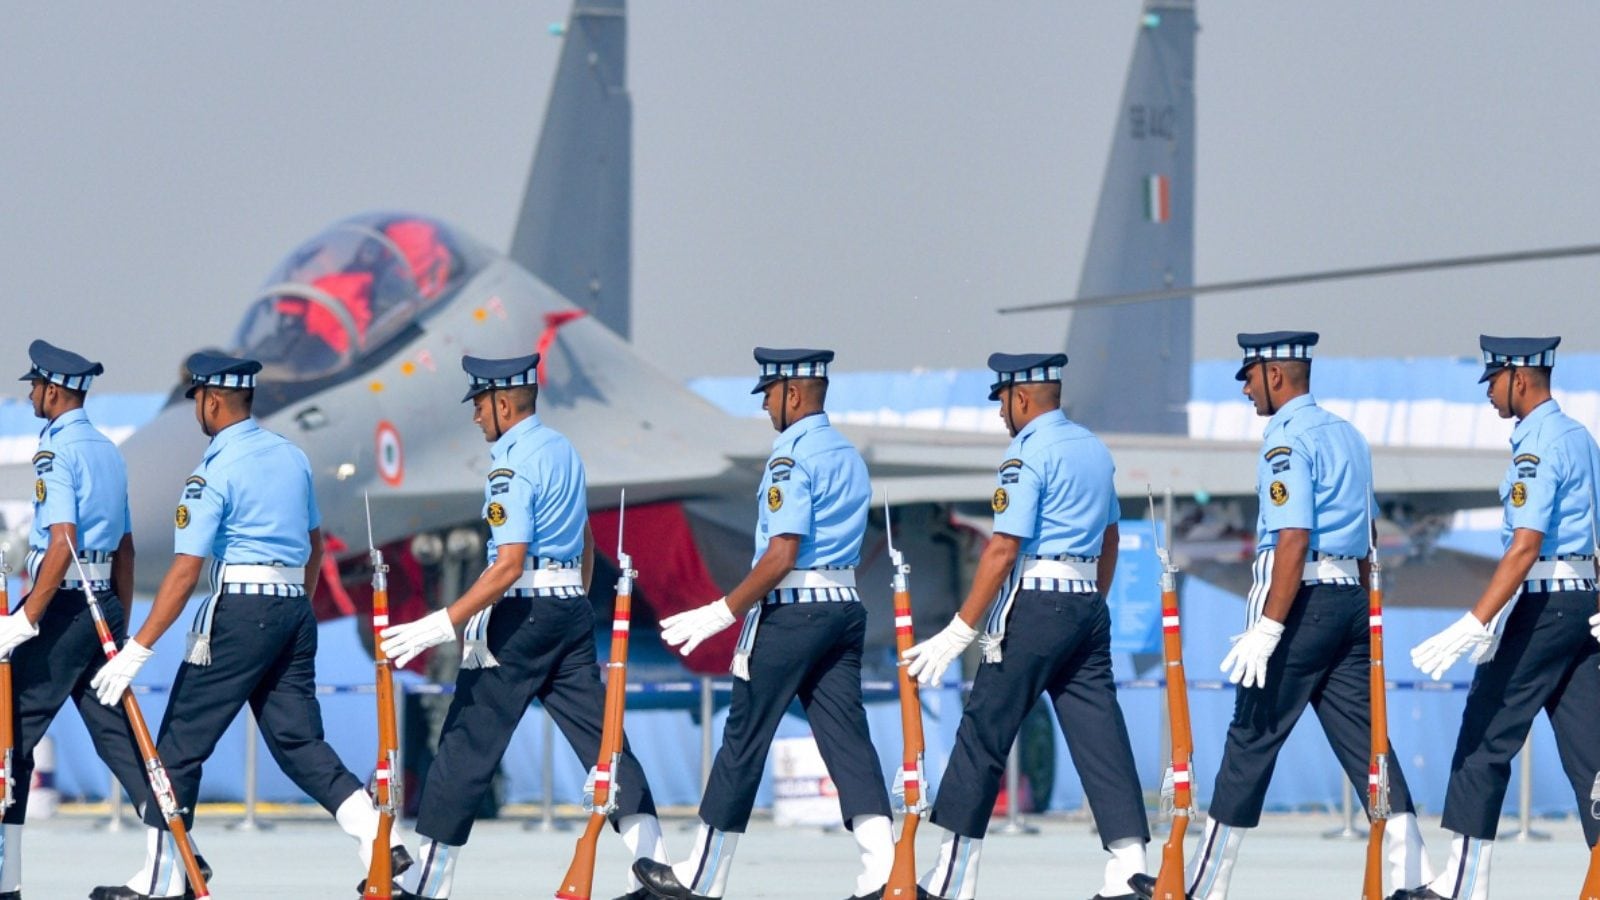 17 Uniforms Of The Indian Air Force That You Have To Earn | Indian air force,  Army day, Air force